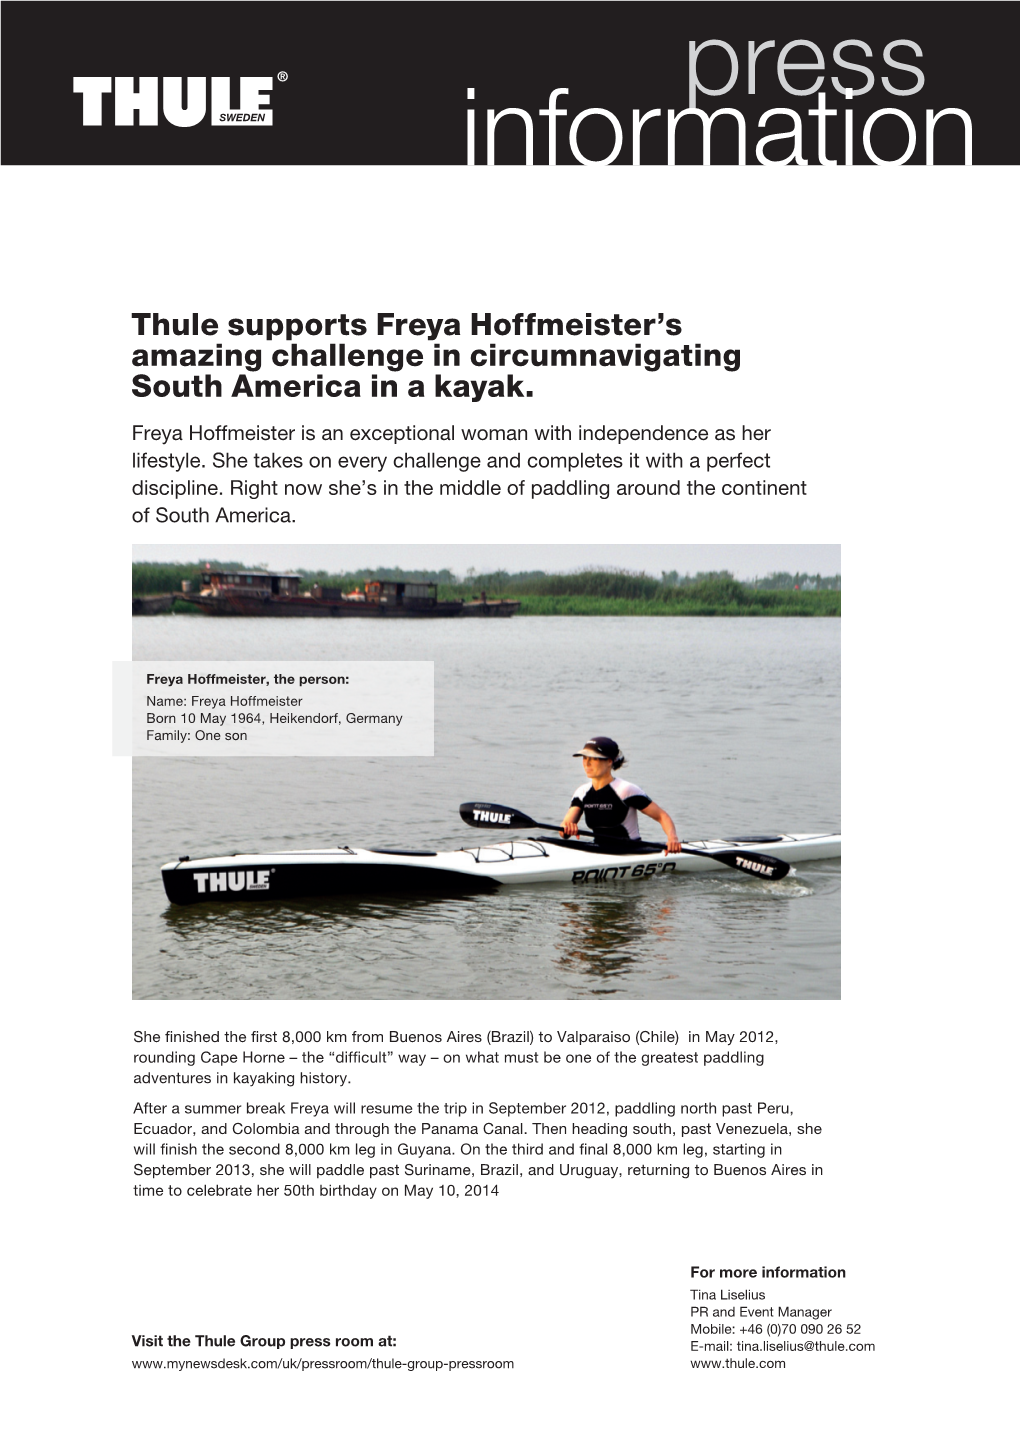 Thule Supports Freya Hoffmeister's Amazing Challenge In